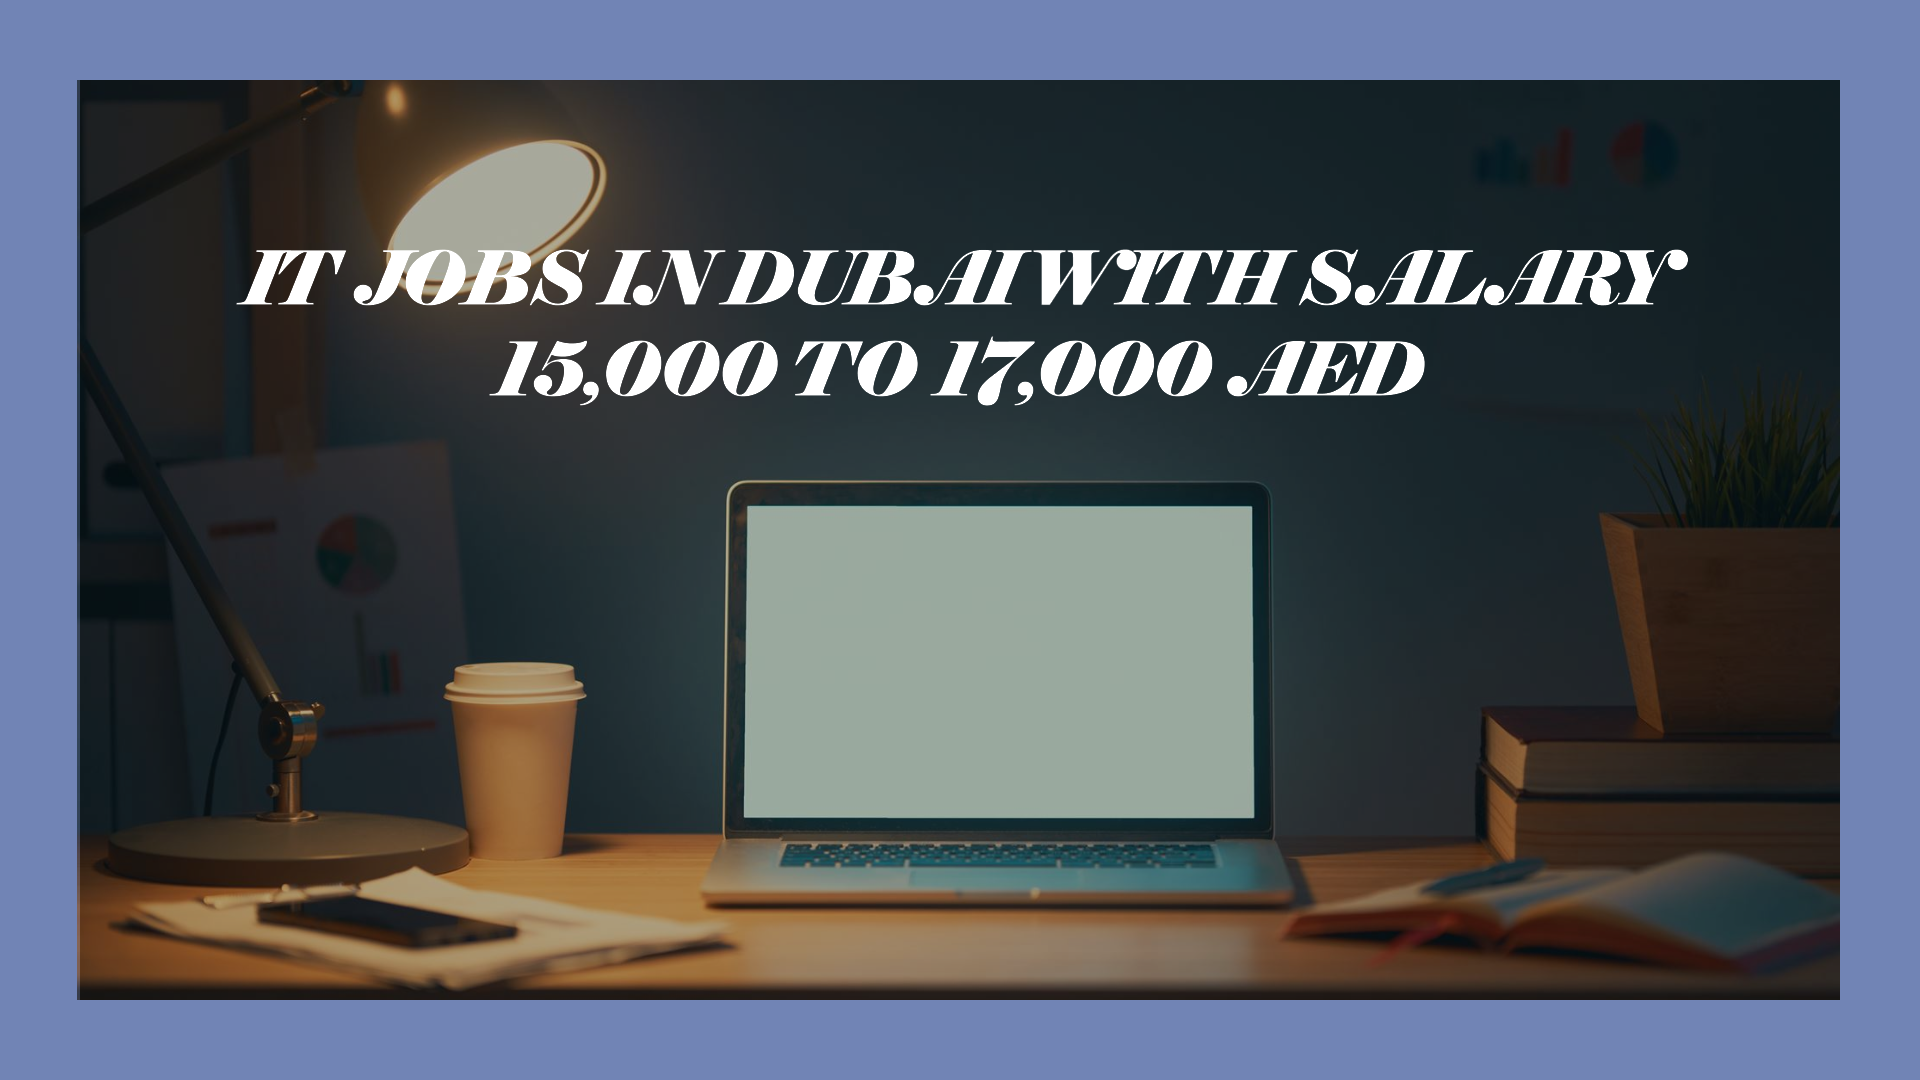 it jobs in dubai with salary 15,000 to 17,000 AED